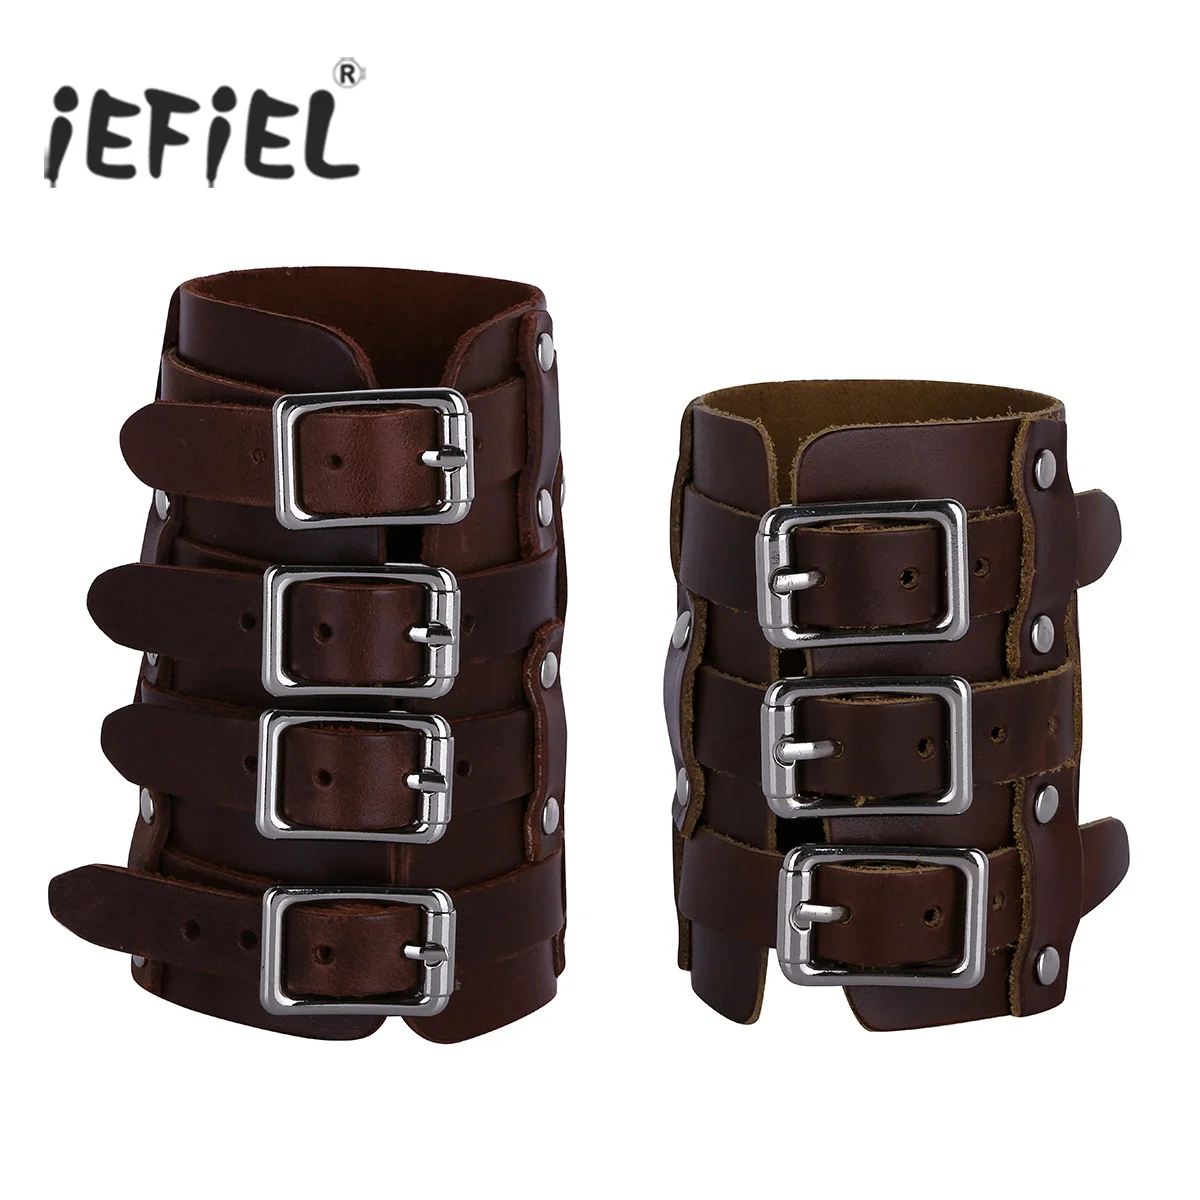 

Coffee Unisex Punk Faux Leather Adjustable Buckles Gauntlet Wristband Wide Medieval Bracers Protective Arm Armor Cuff Costumes